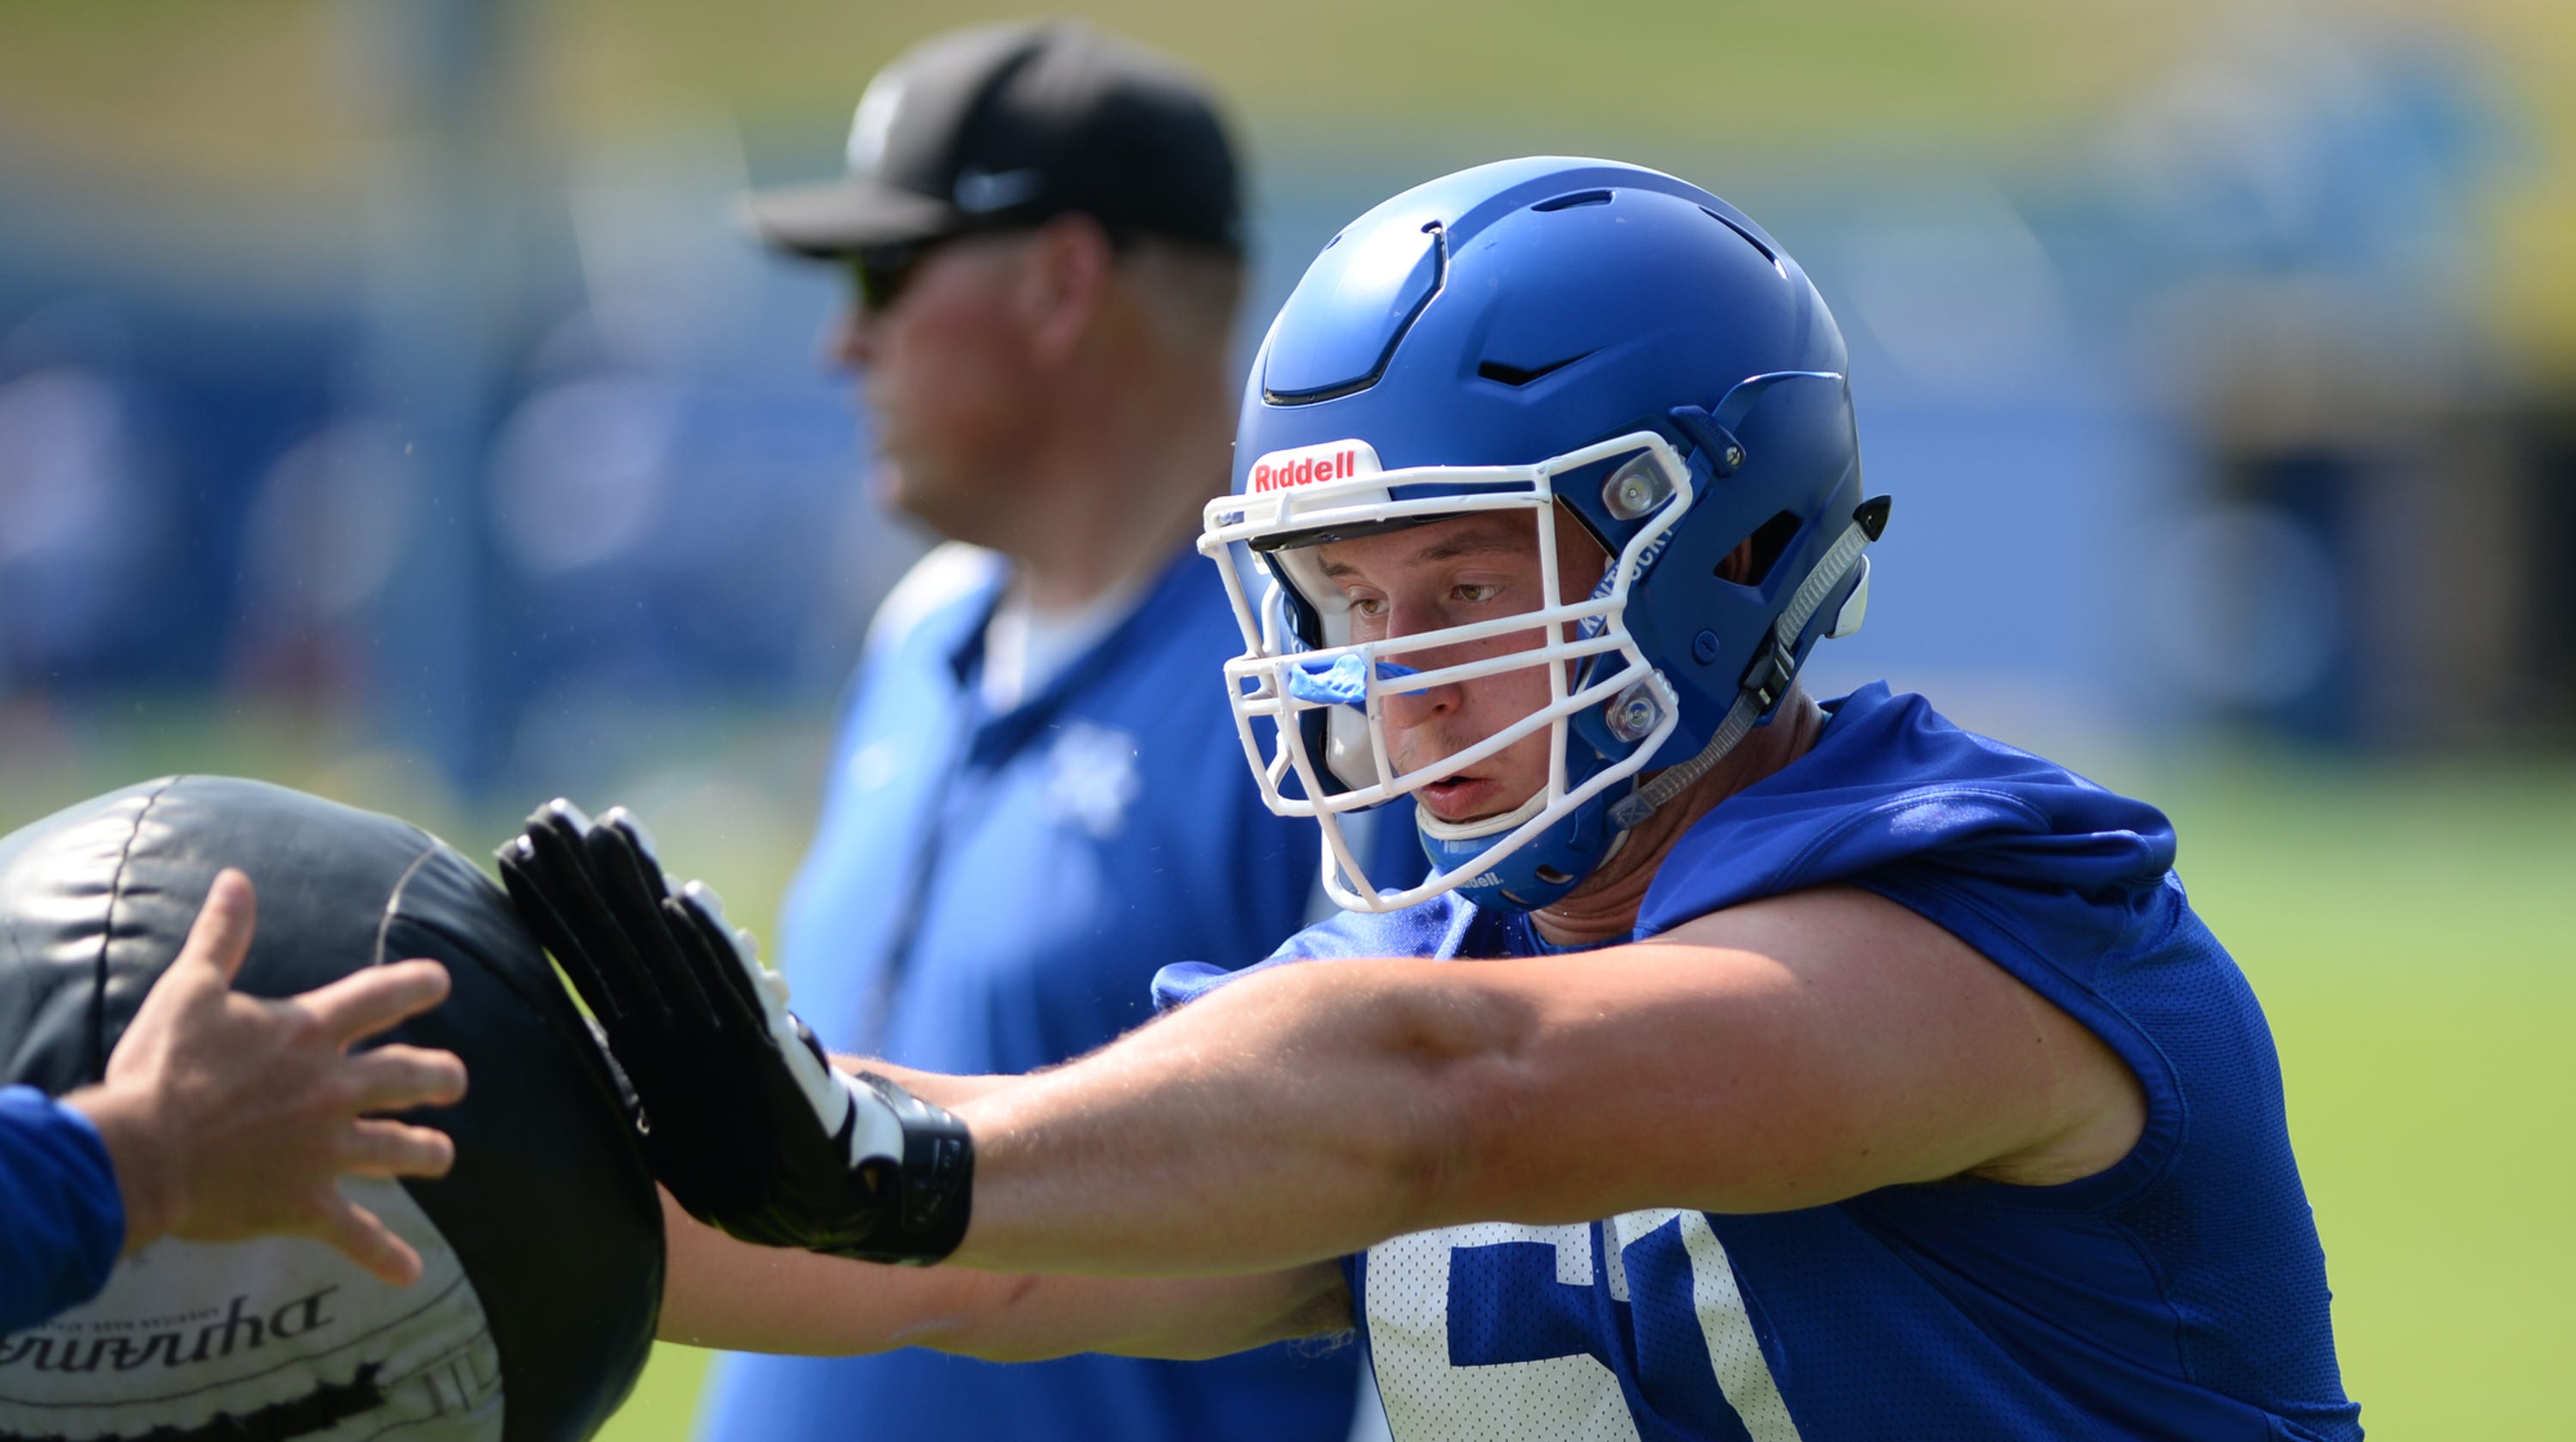 Kentucky Football | Landon Young out for the season with knee injury